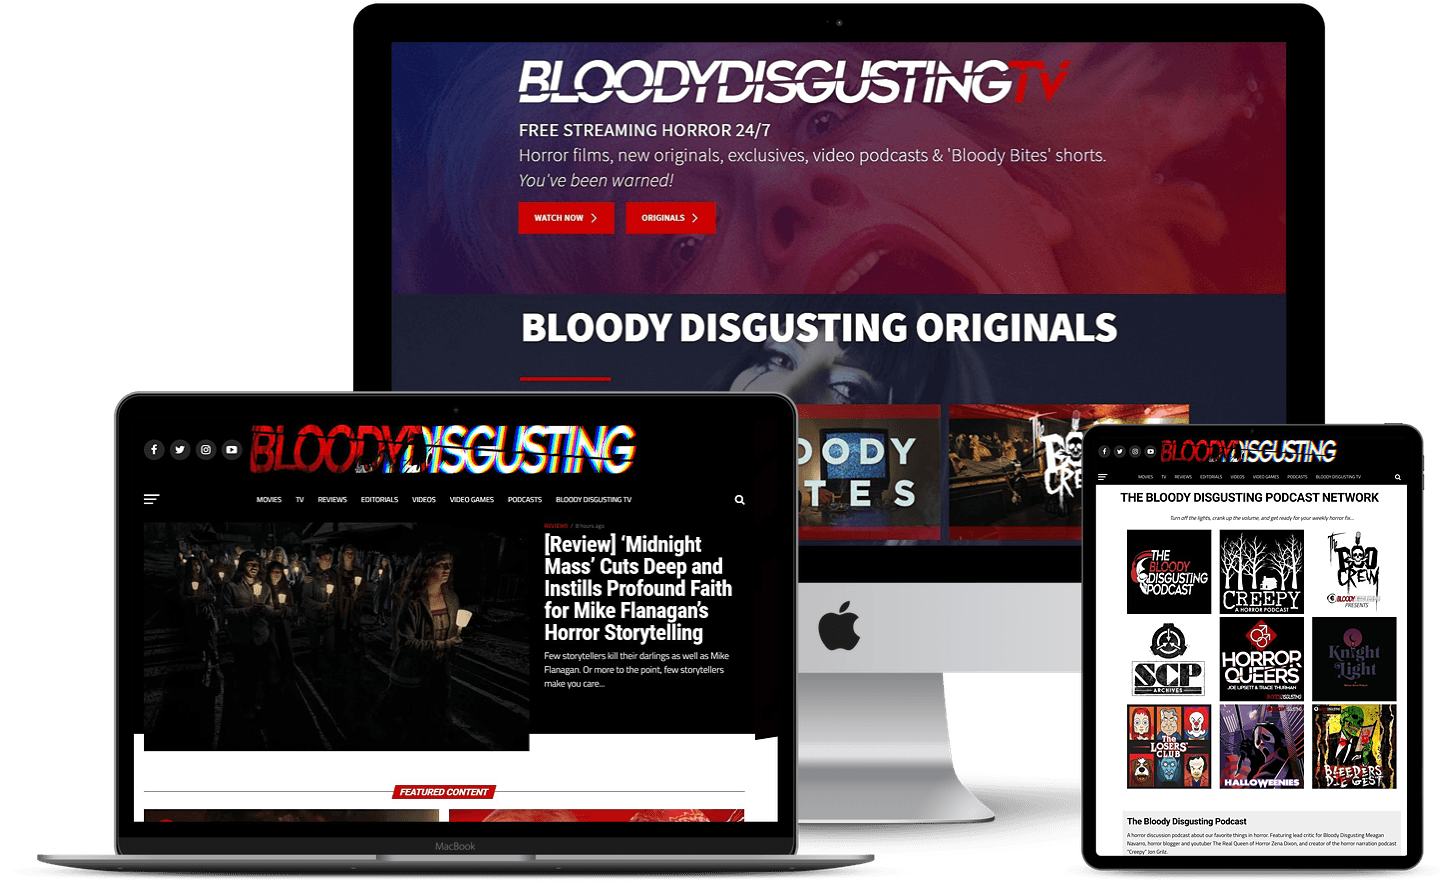 Cinedigm Adds to Its Horror Lineup with the Acquisition of Bloody Disgusting